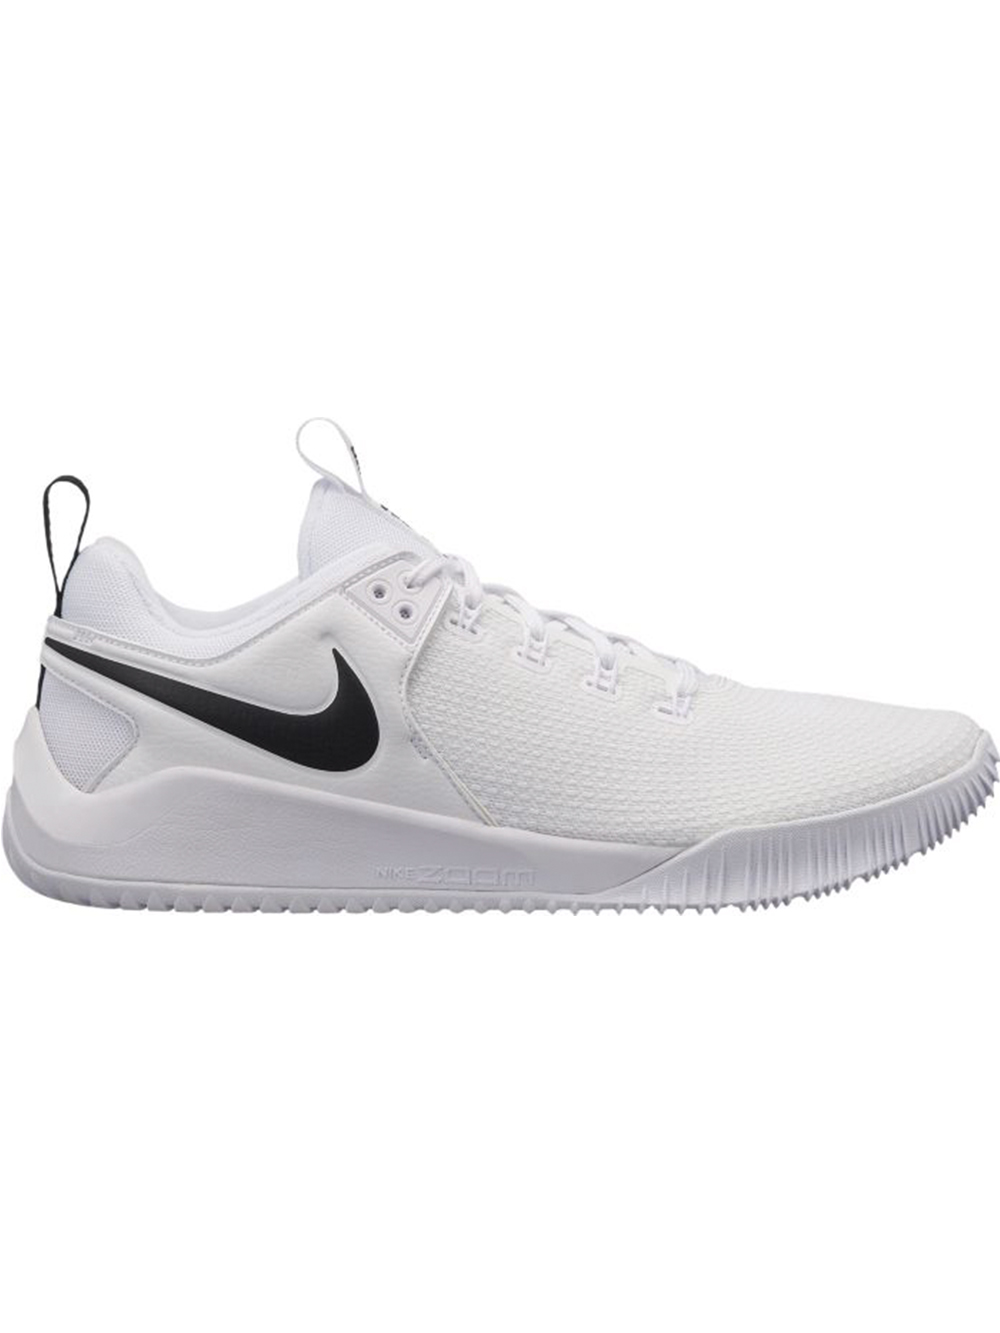 nike hyperace white volleyball shoes